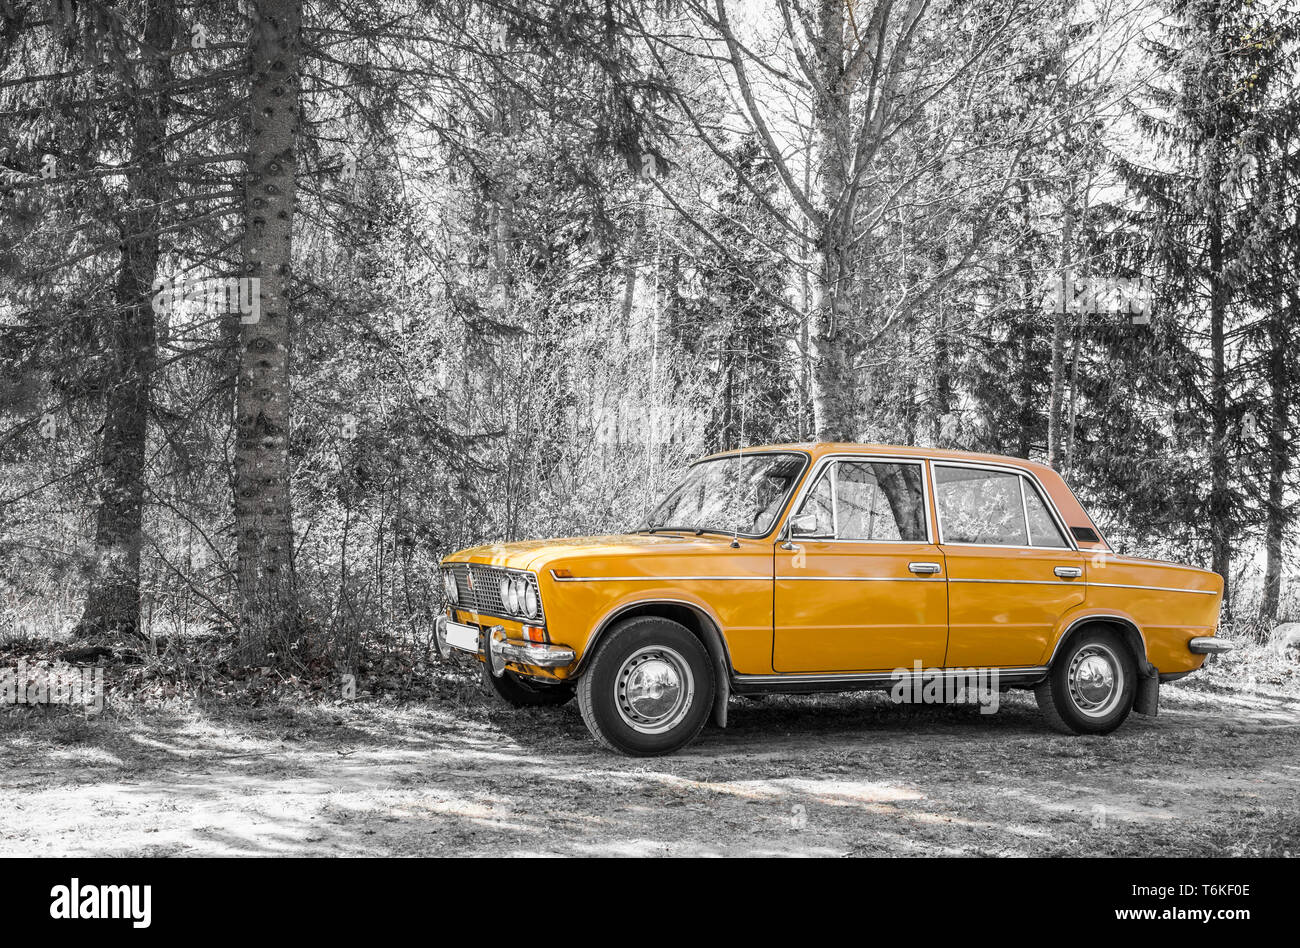 Tallinn,Harjumaa/Estonia-01MAY2019: Perfect condition retro car LADA 1600 (from year 1977) parked by the dirt road, next to forest, nature outdoors in Stock Photo